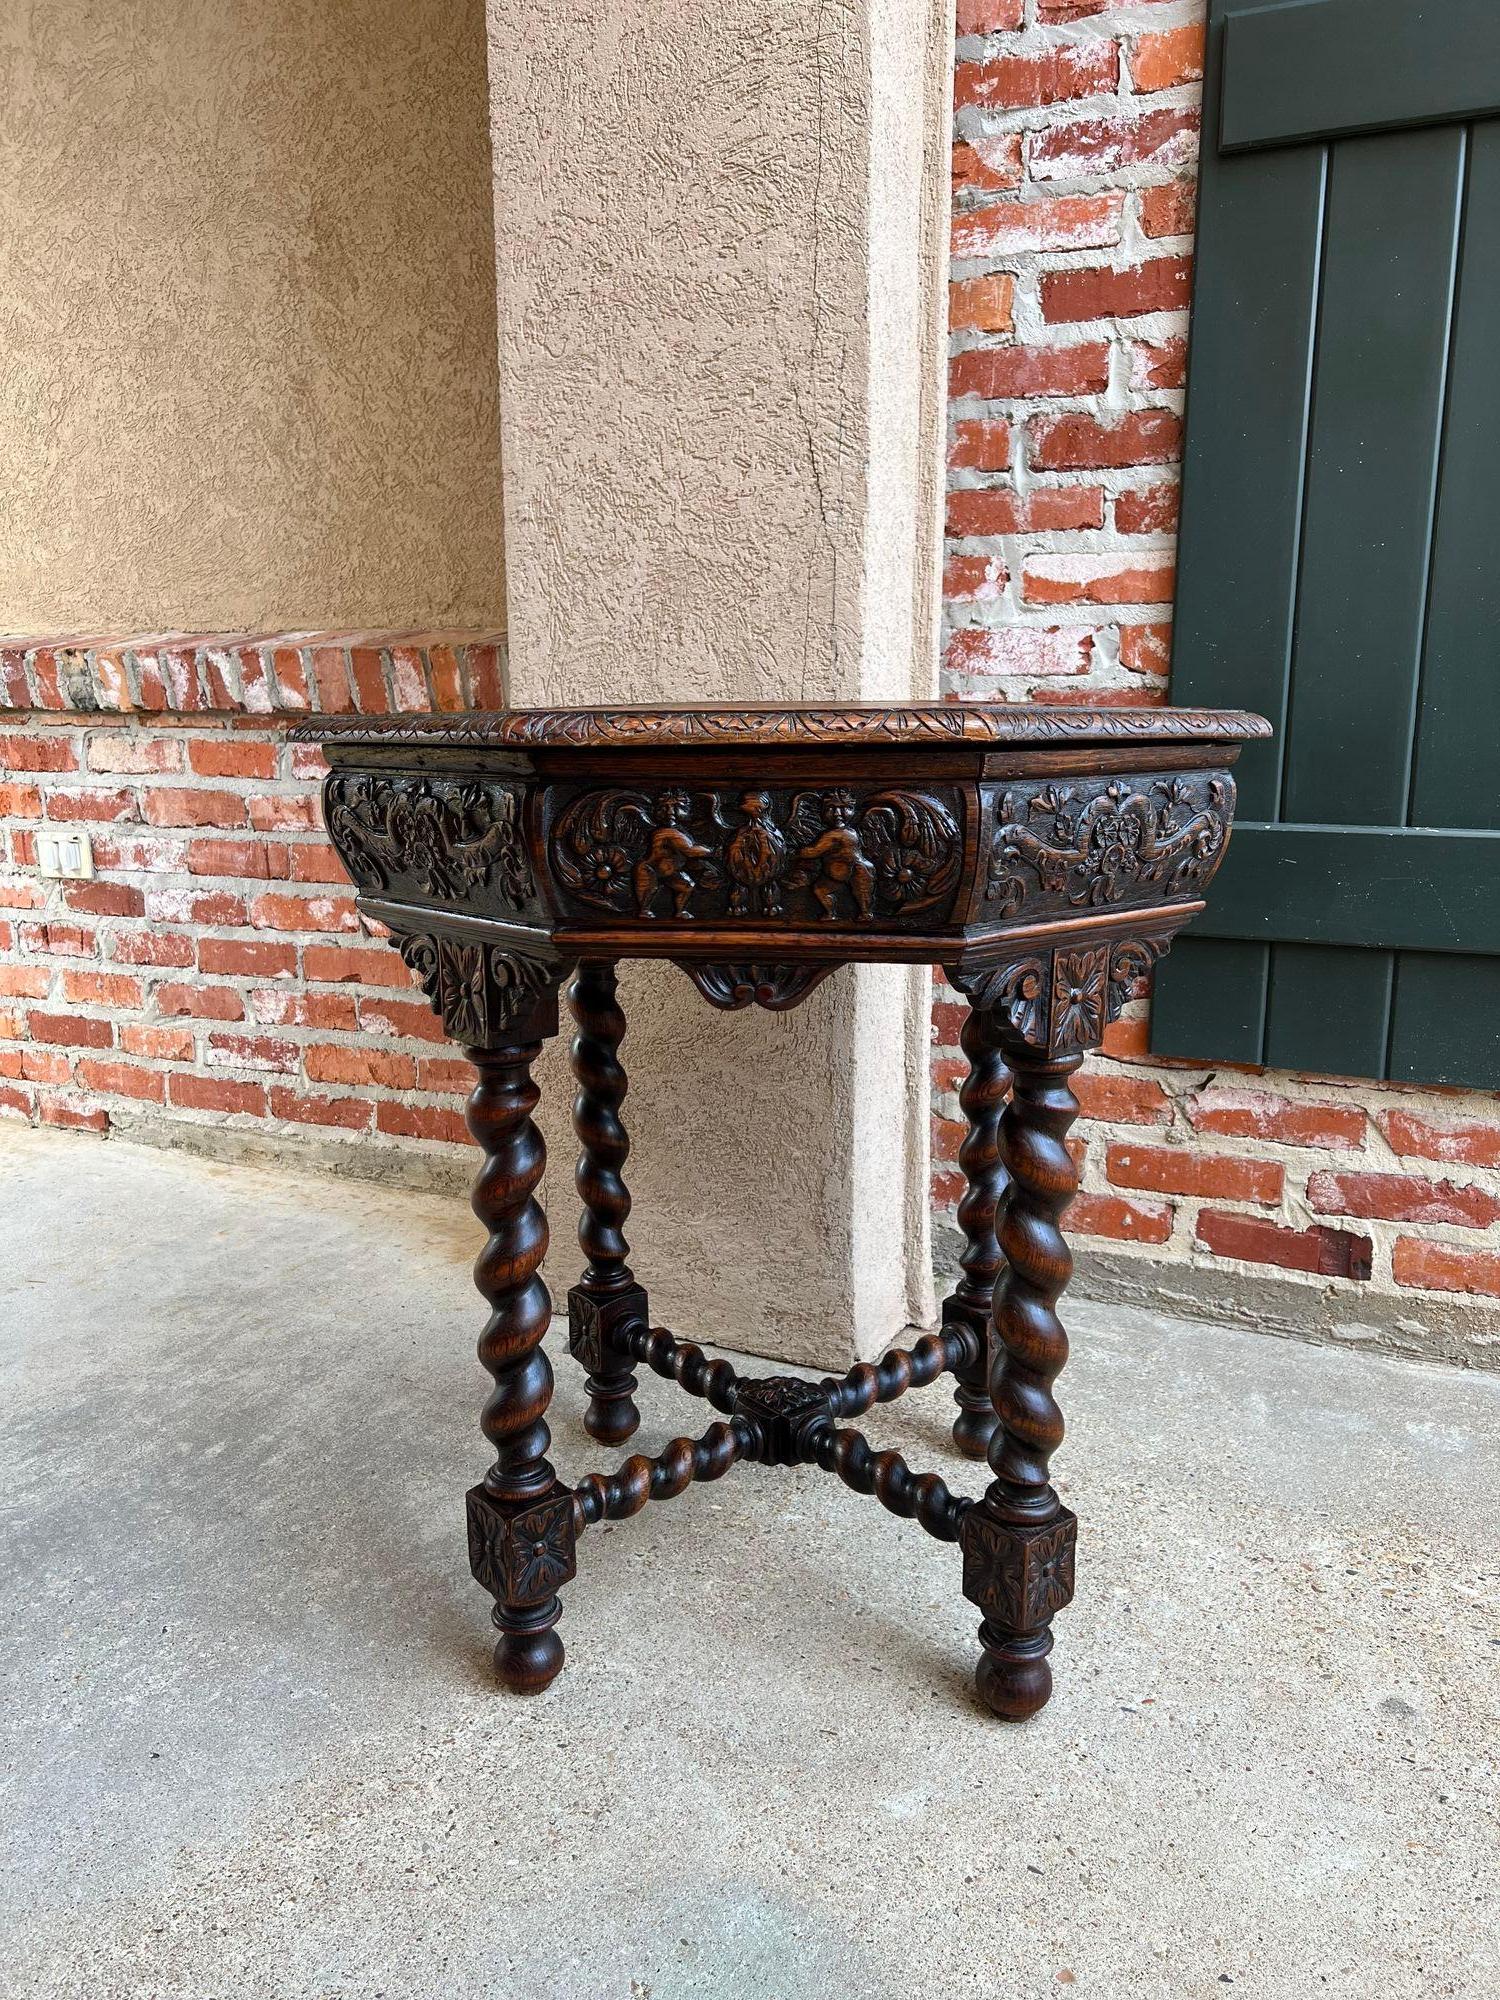 Antique French Octagon sofa table carved oak Barley Twist Louis XIII Renaissance.

Direct from France, a fabulous antique French octagon table, with impressive details, including barley twist legs and barley twist cross stretchers. This style